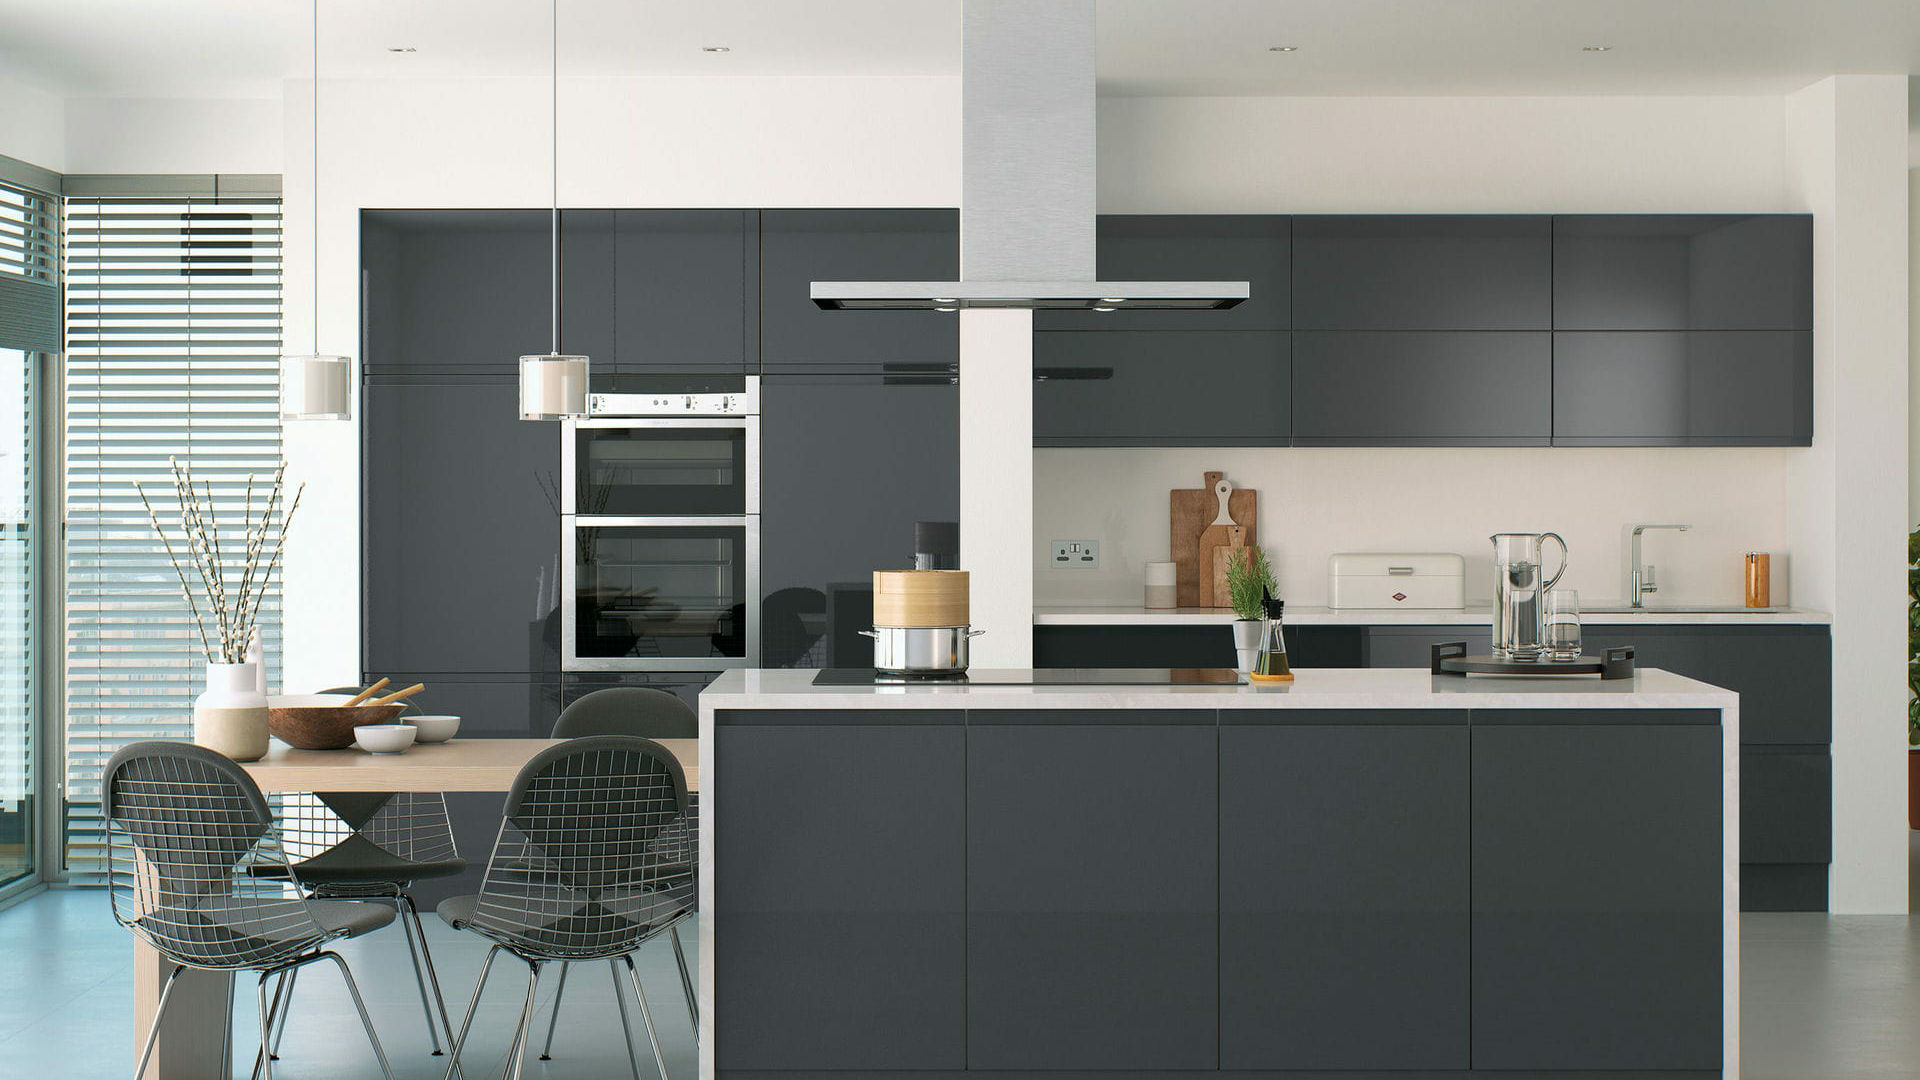 Handleless high gloss anthracite kitchens offering a sleek, reflective surface for a bold, contemporary aesthetic